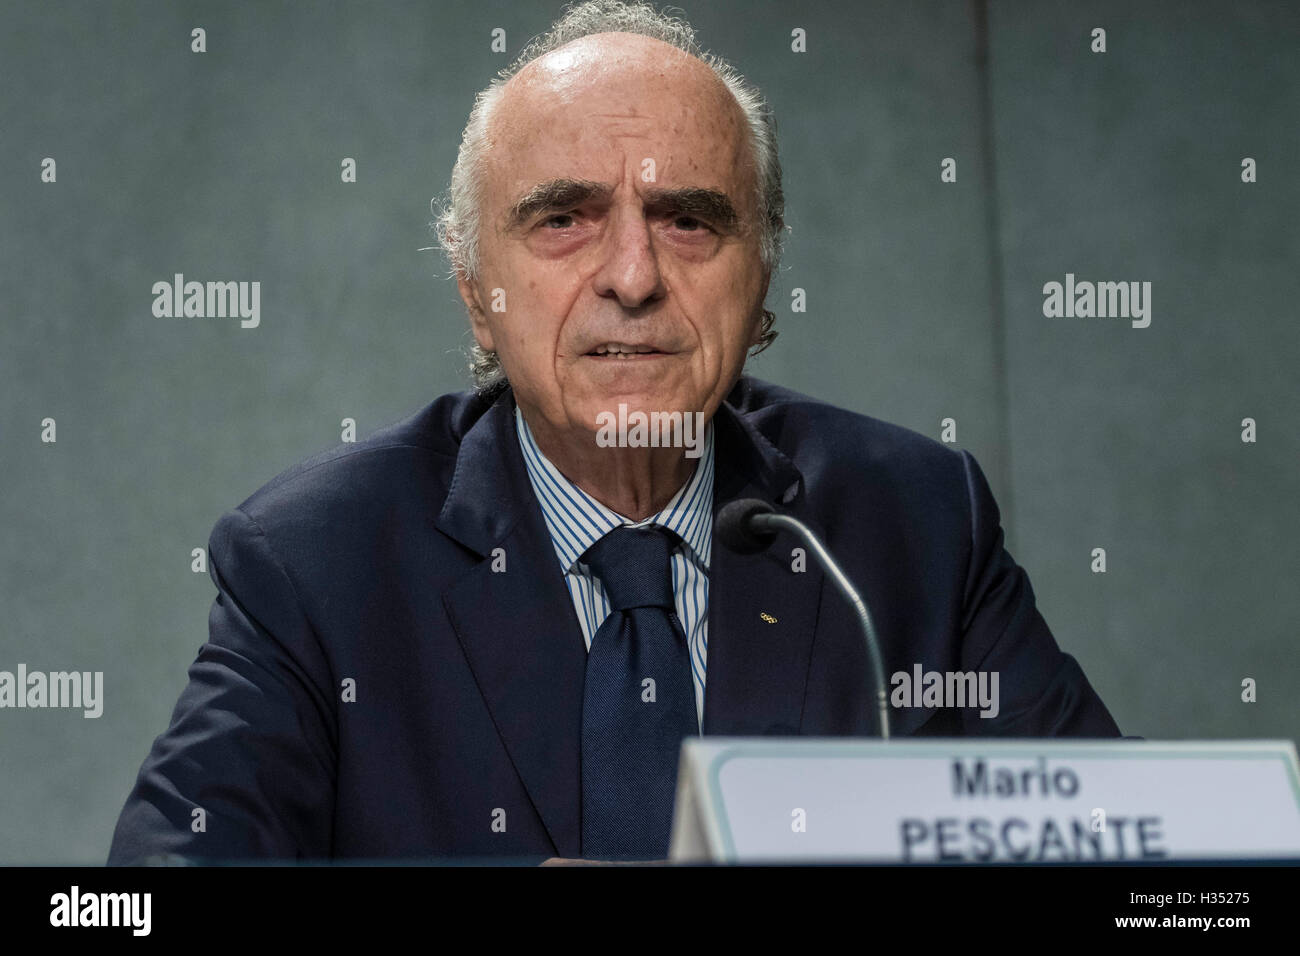 Vatican City, Vatican. 04th October, 2016. Mario Pescante, Olympic Committee Vice-president, attends a press conference, at the Vatican Press Center, in Vatican City, Vatican on October 04, 2016. The Vatican will be hosting the first 'Sport at the Service of Humanity' conference with Pope Francis scheduled to participate at the opening ceremony Wednesday Oct. 5, 2016, along with UN secretary general Ban Ki-moon and International Olympic Committee President Thomas Bach. Credit:  Giuseppe Ciccia/Alamy Live News Stock Photo